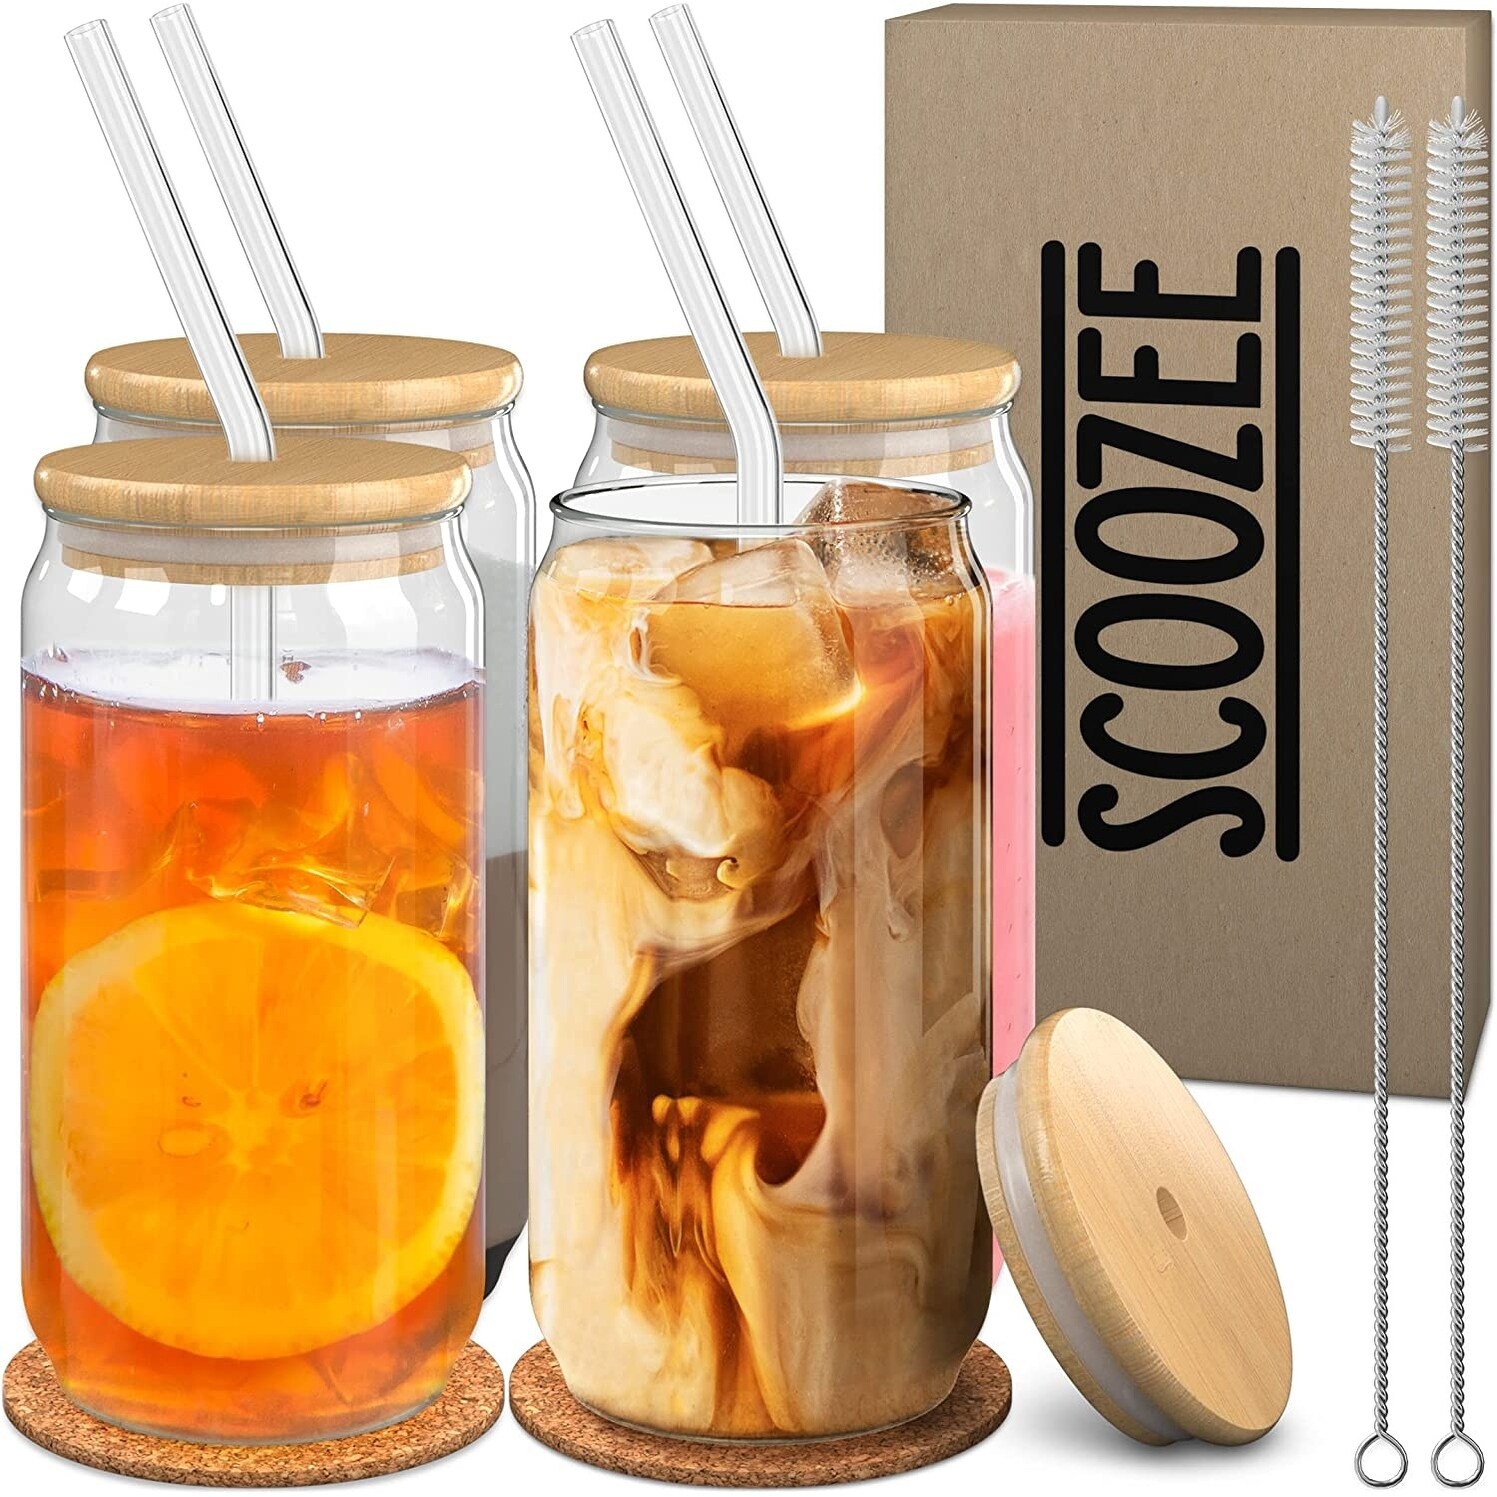 https://ak1.ostkcdn.com/images/products/is/images/direct/02c5fbd8dca4e57342ecd982b17f8cc9426e9212/Scoozee-Glass-Cups-with-Lids-and-Straws-%28Set-of-4---16-oz%29.jpg